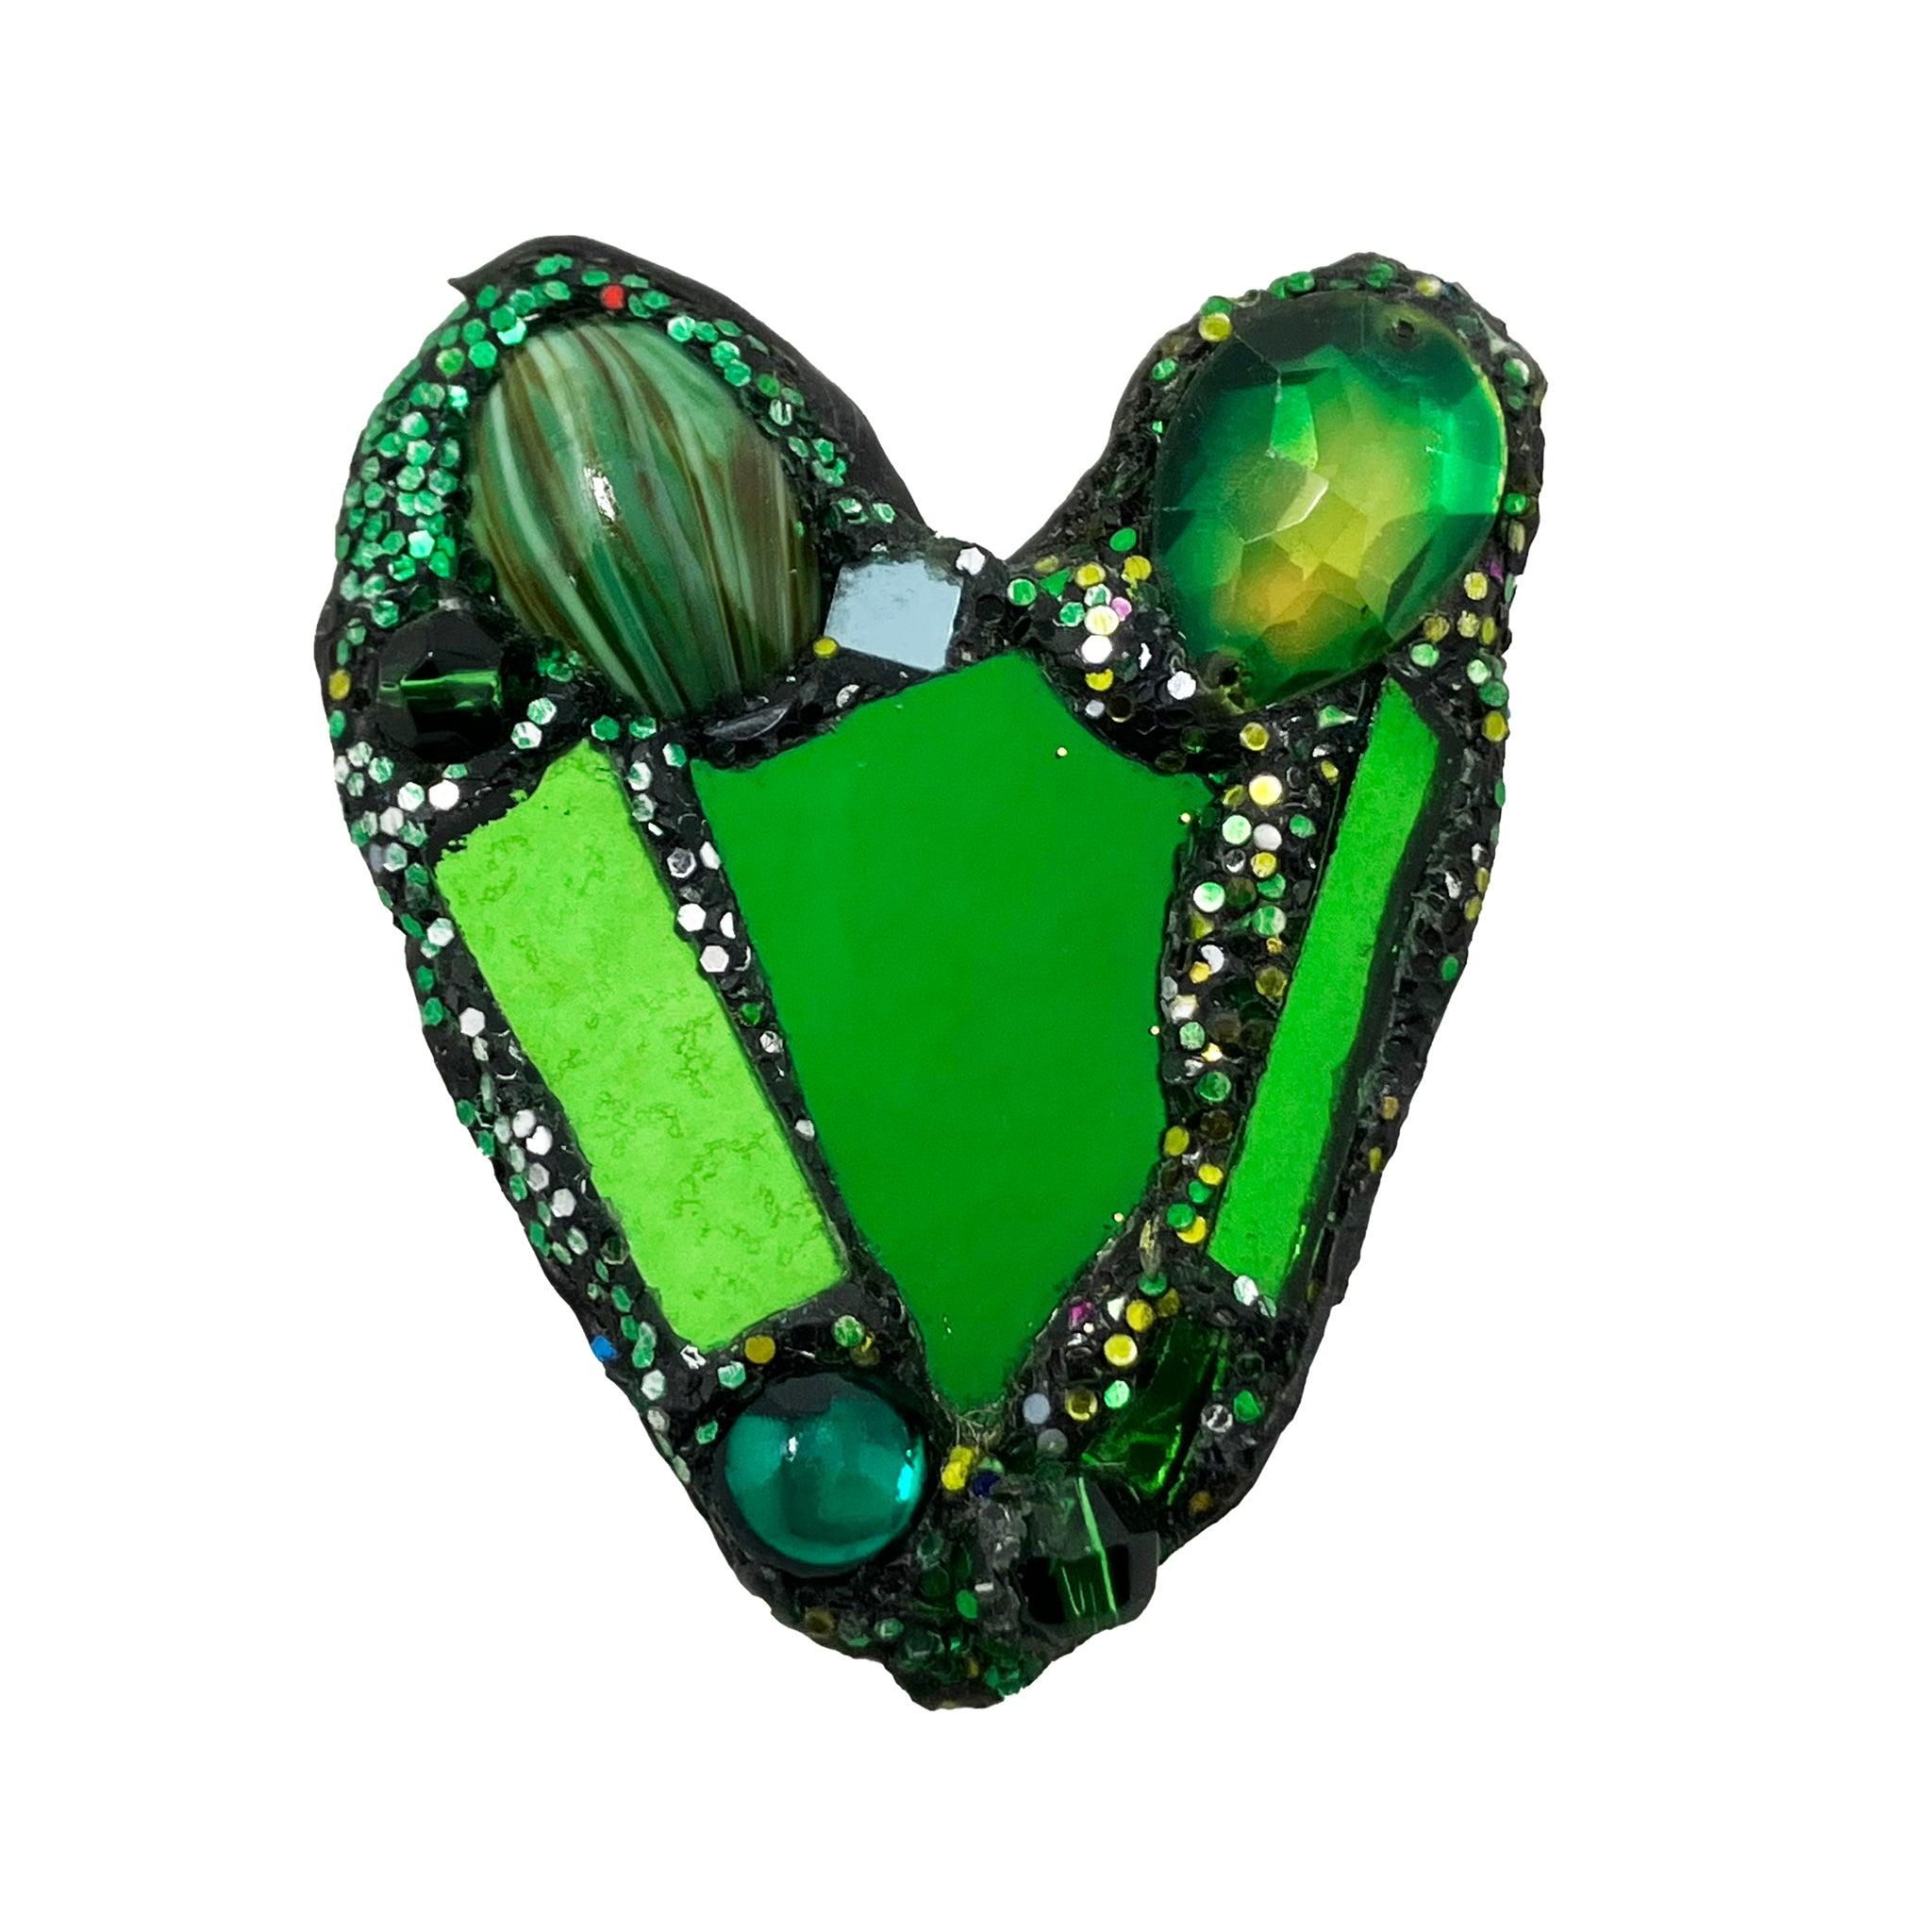 GREEN HEART BROOCH WITH MARBLE, 2022